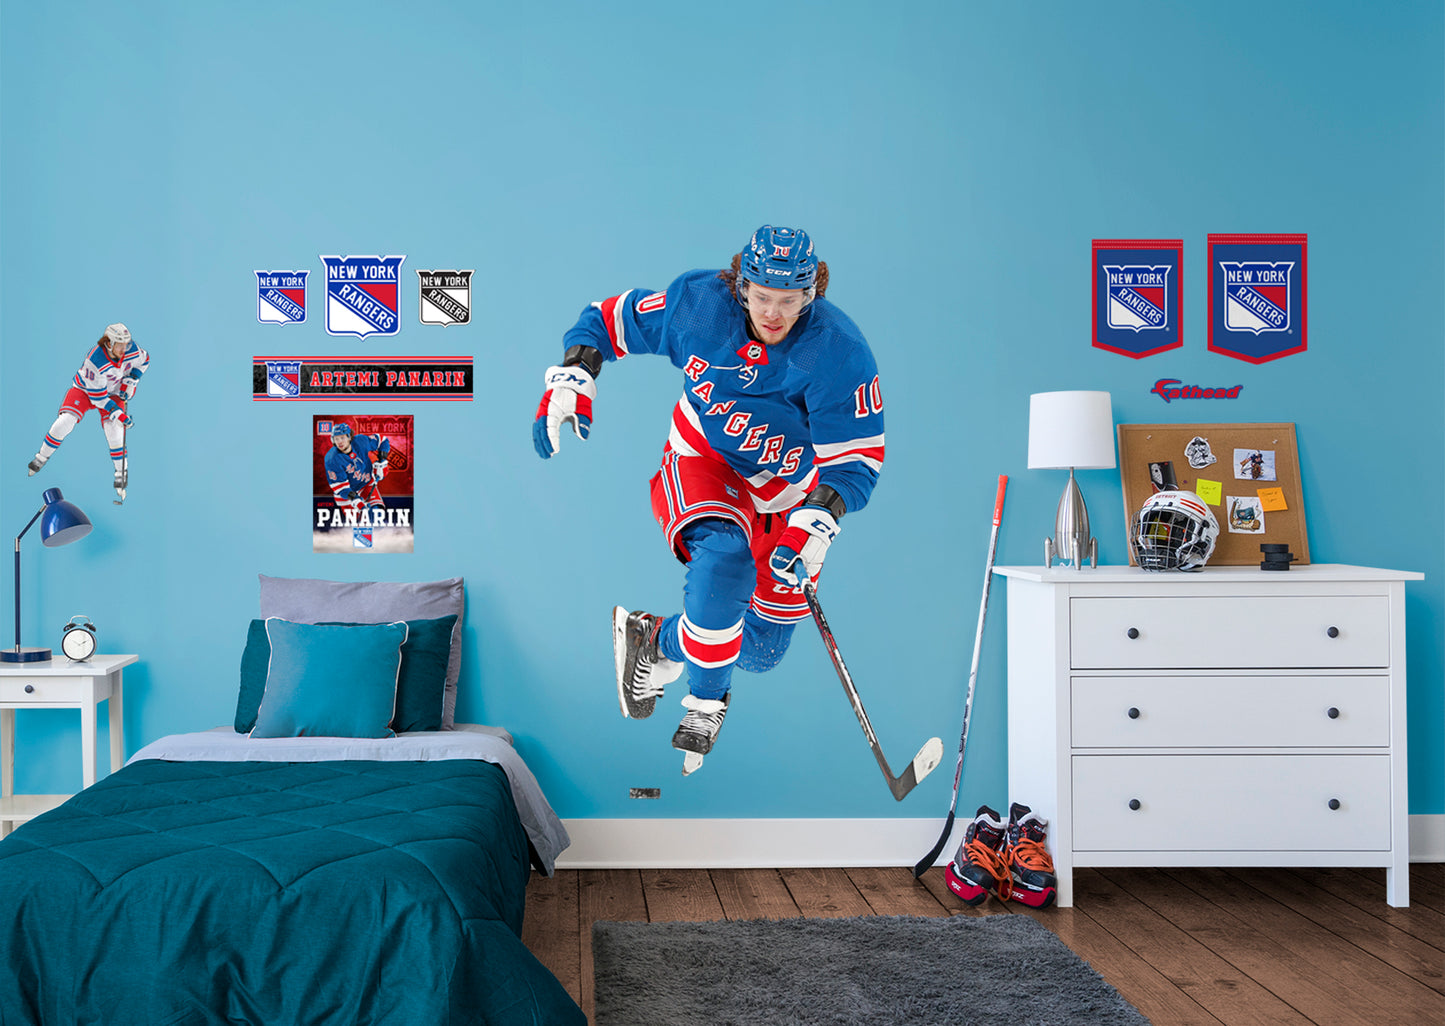 New York Rangers: Artemi Panarin         - Officially Licensed NHL Removable Wall   Adhesive Decal